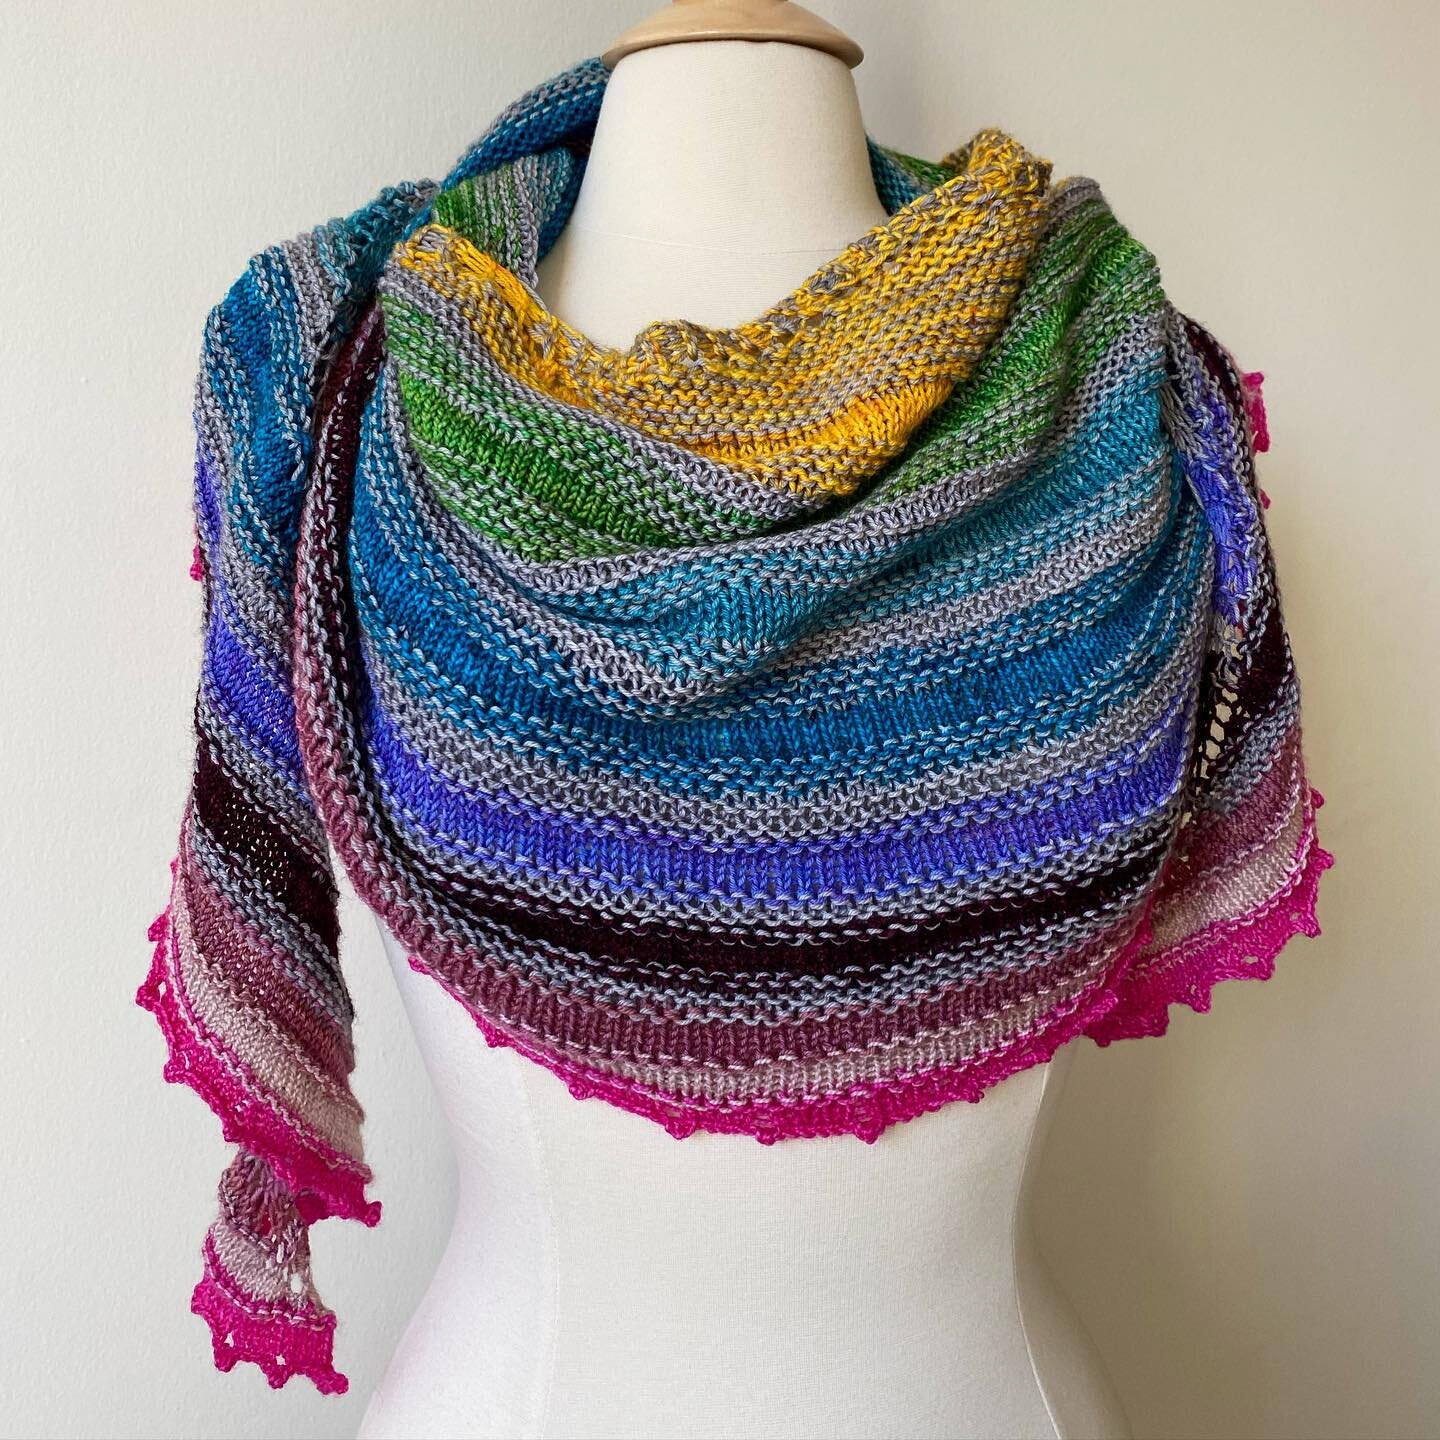 In case you missed the memo: I love the West Chicago Knit Shawl. 💖🌈☀️🌺🥰 and the Gals who dyed the yarn for it. It&rsquo;s perfect for Spring &amp; Summer and this group of indie dyers just blew me away.
.
I love getting your messages as you are r